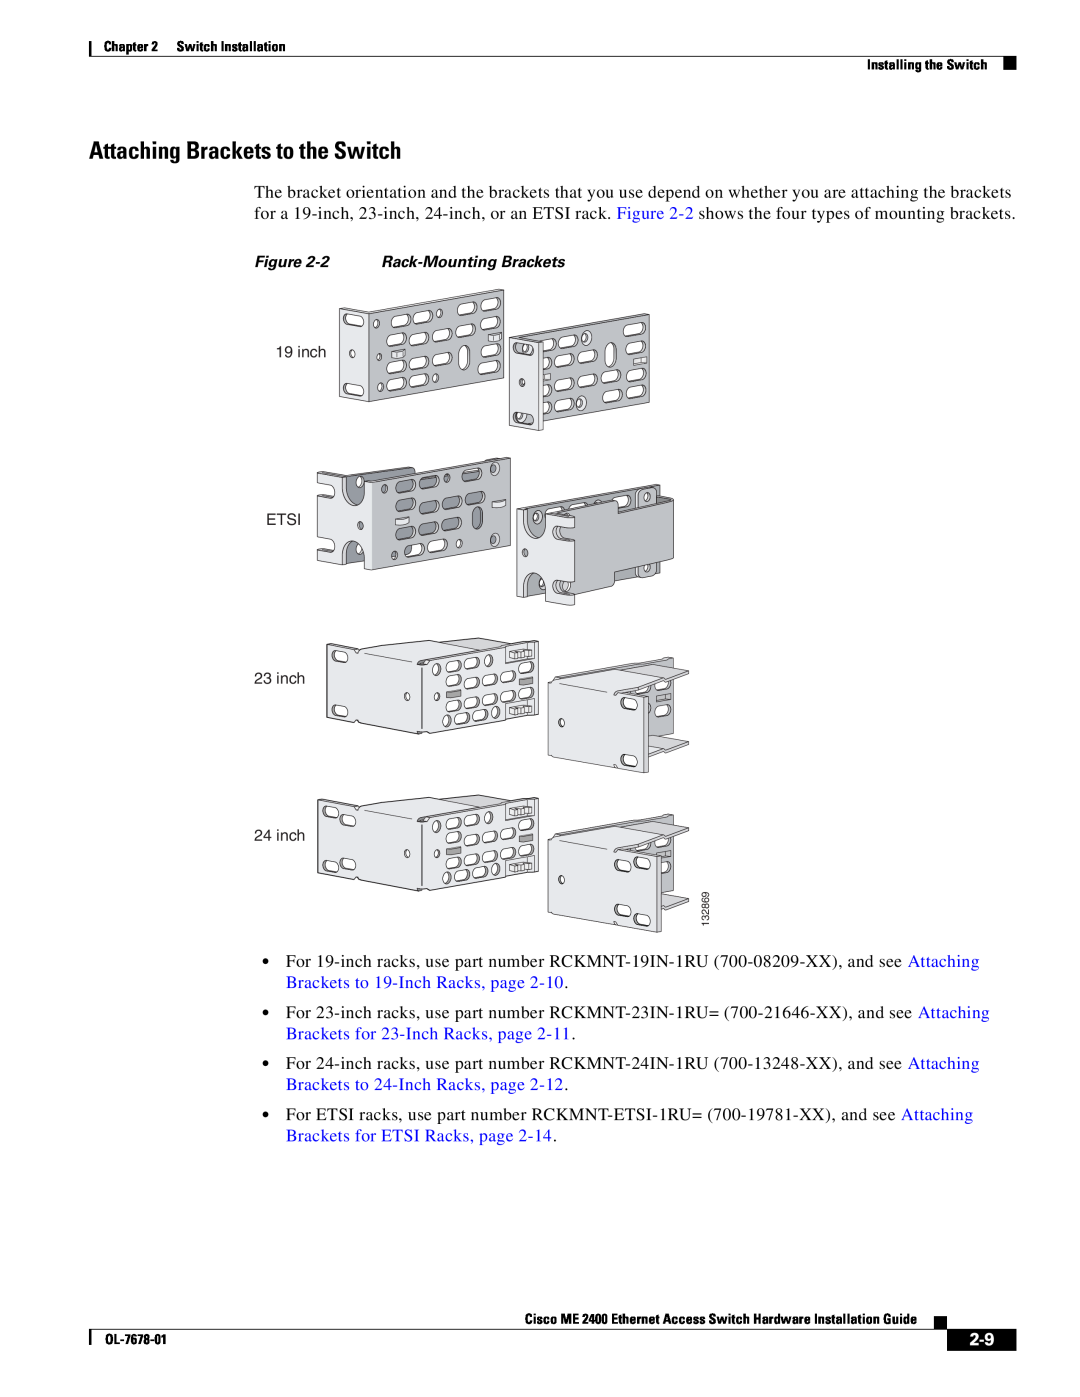 Cisco Systems ME 2400 manual Attaching Brackets to the Switch, 2 Rack-Mounting Brackets 